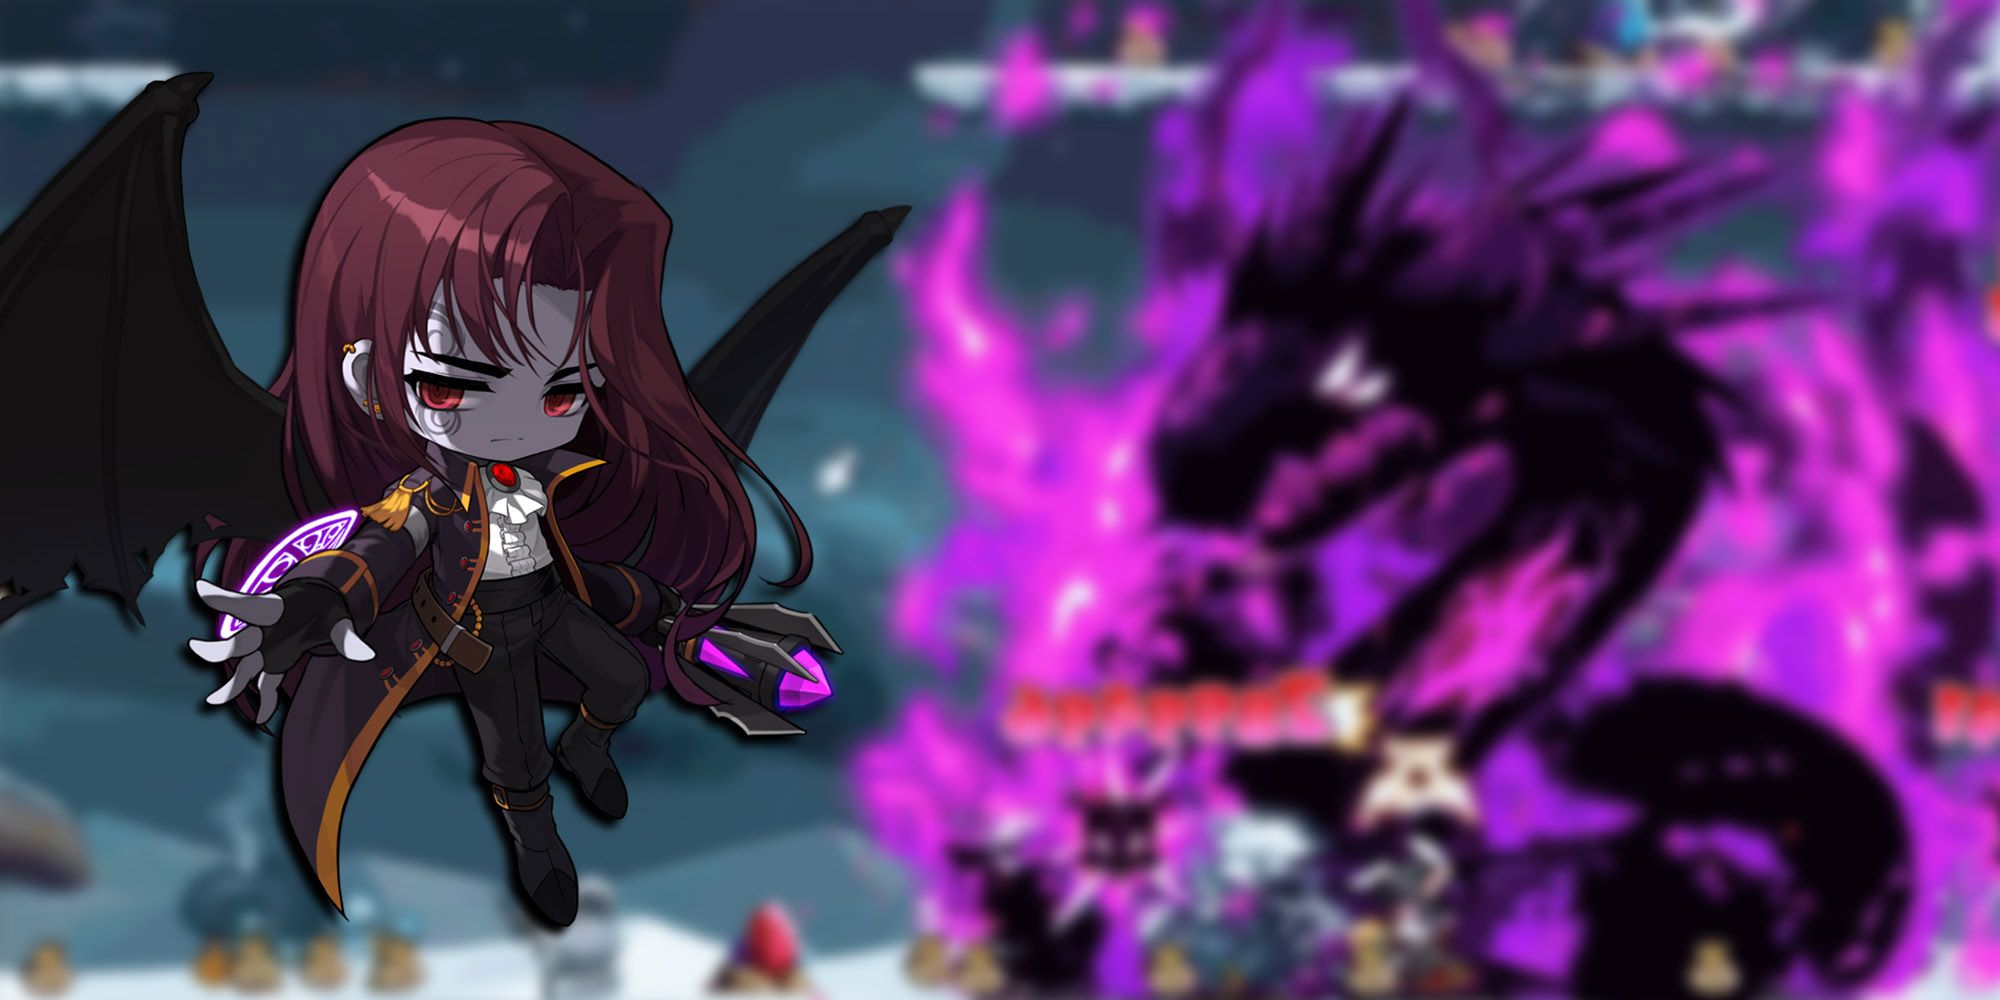 Maplestory - Demon Slayer Using Spirit Of Rage Skill With PNG Of Demon Slayer On Top